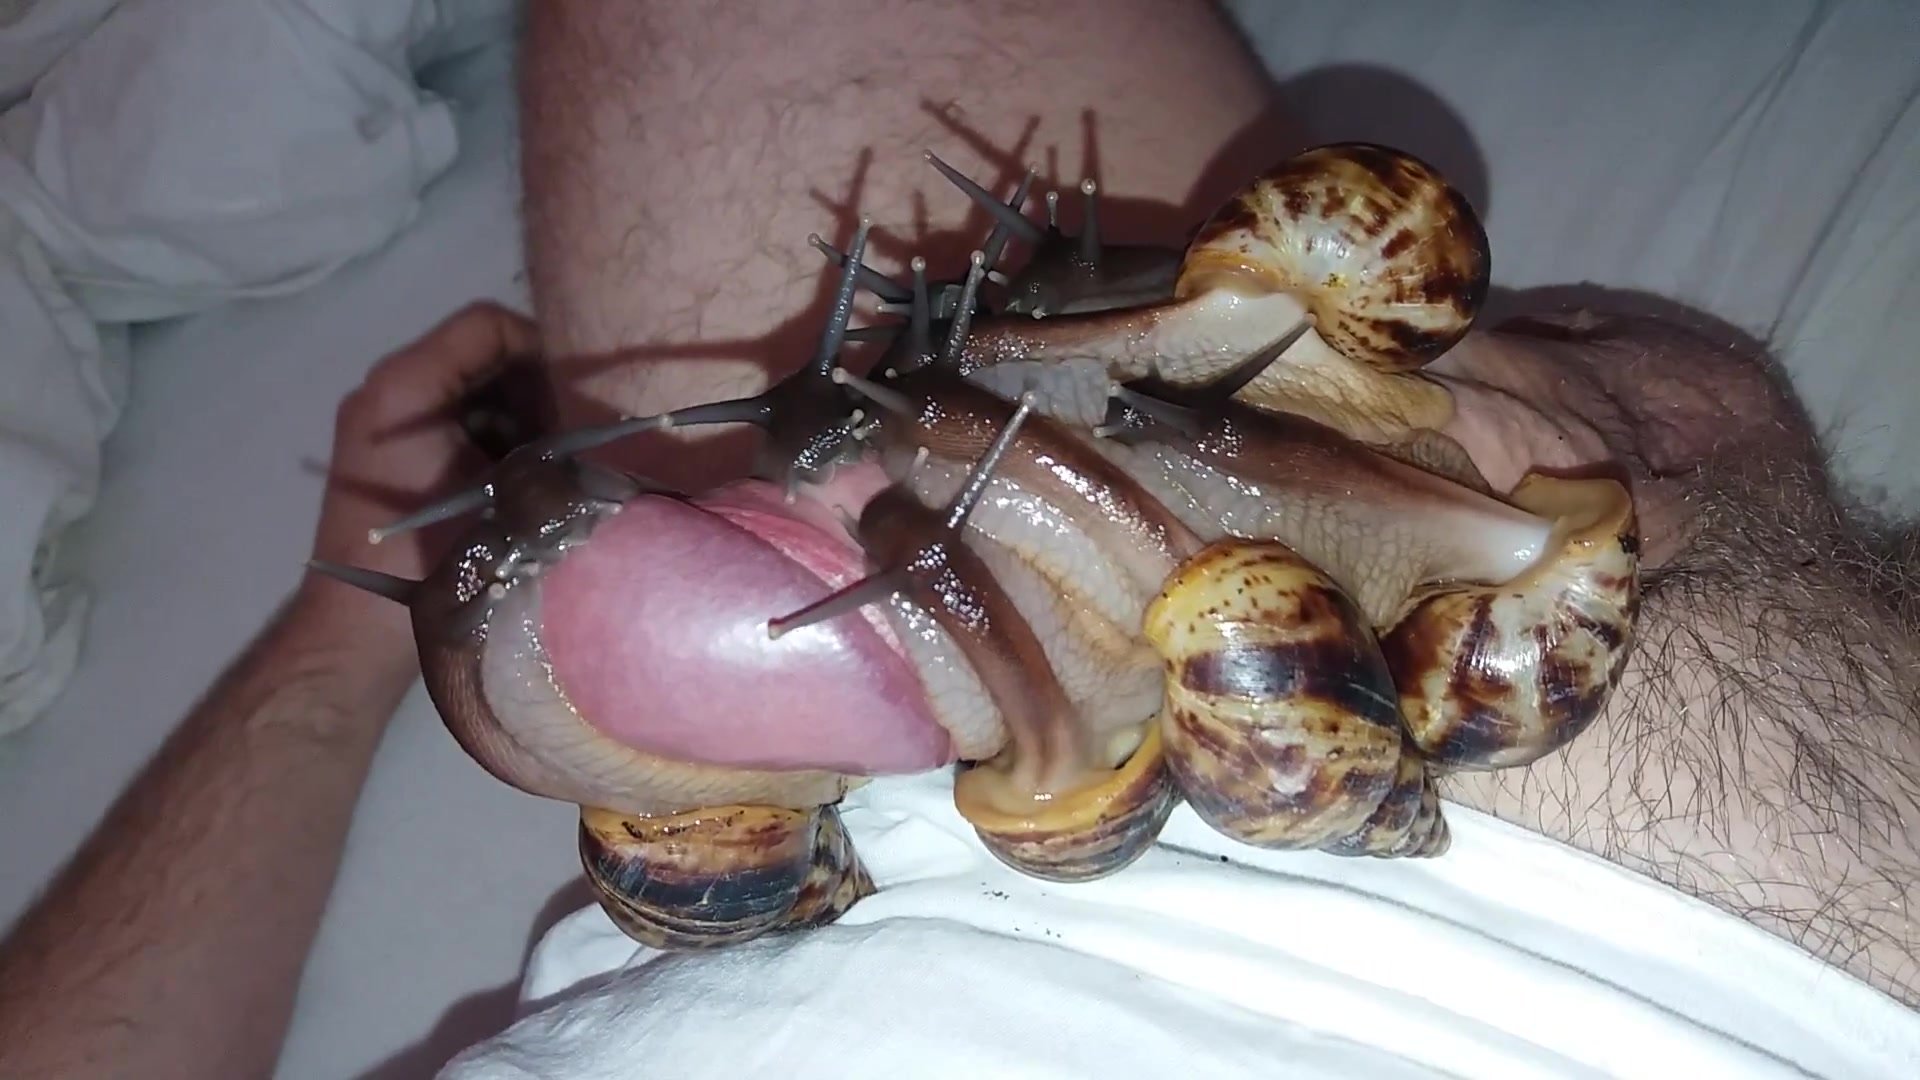 More snails, more cum / Zoo Tube 1